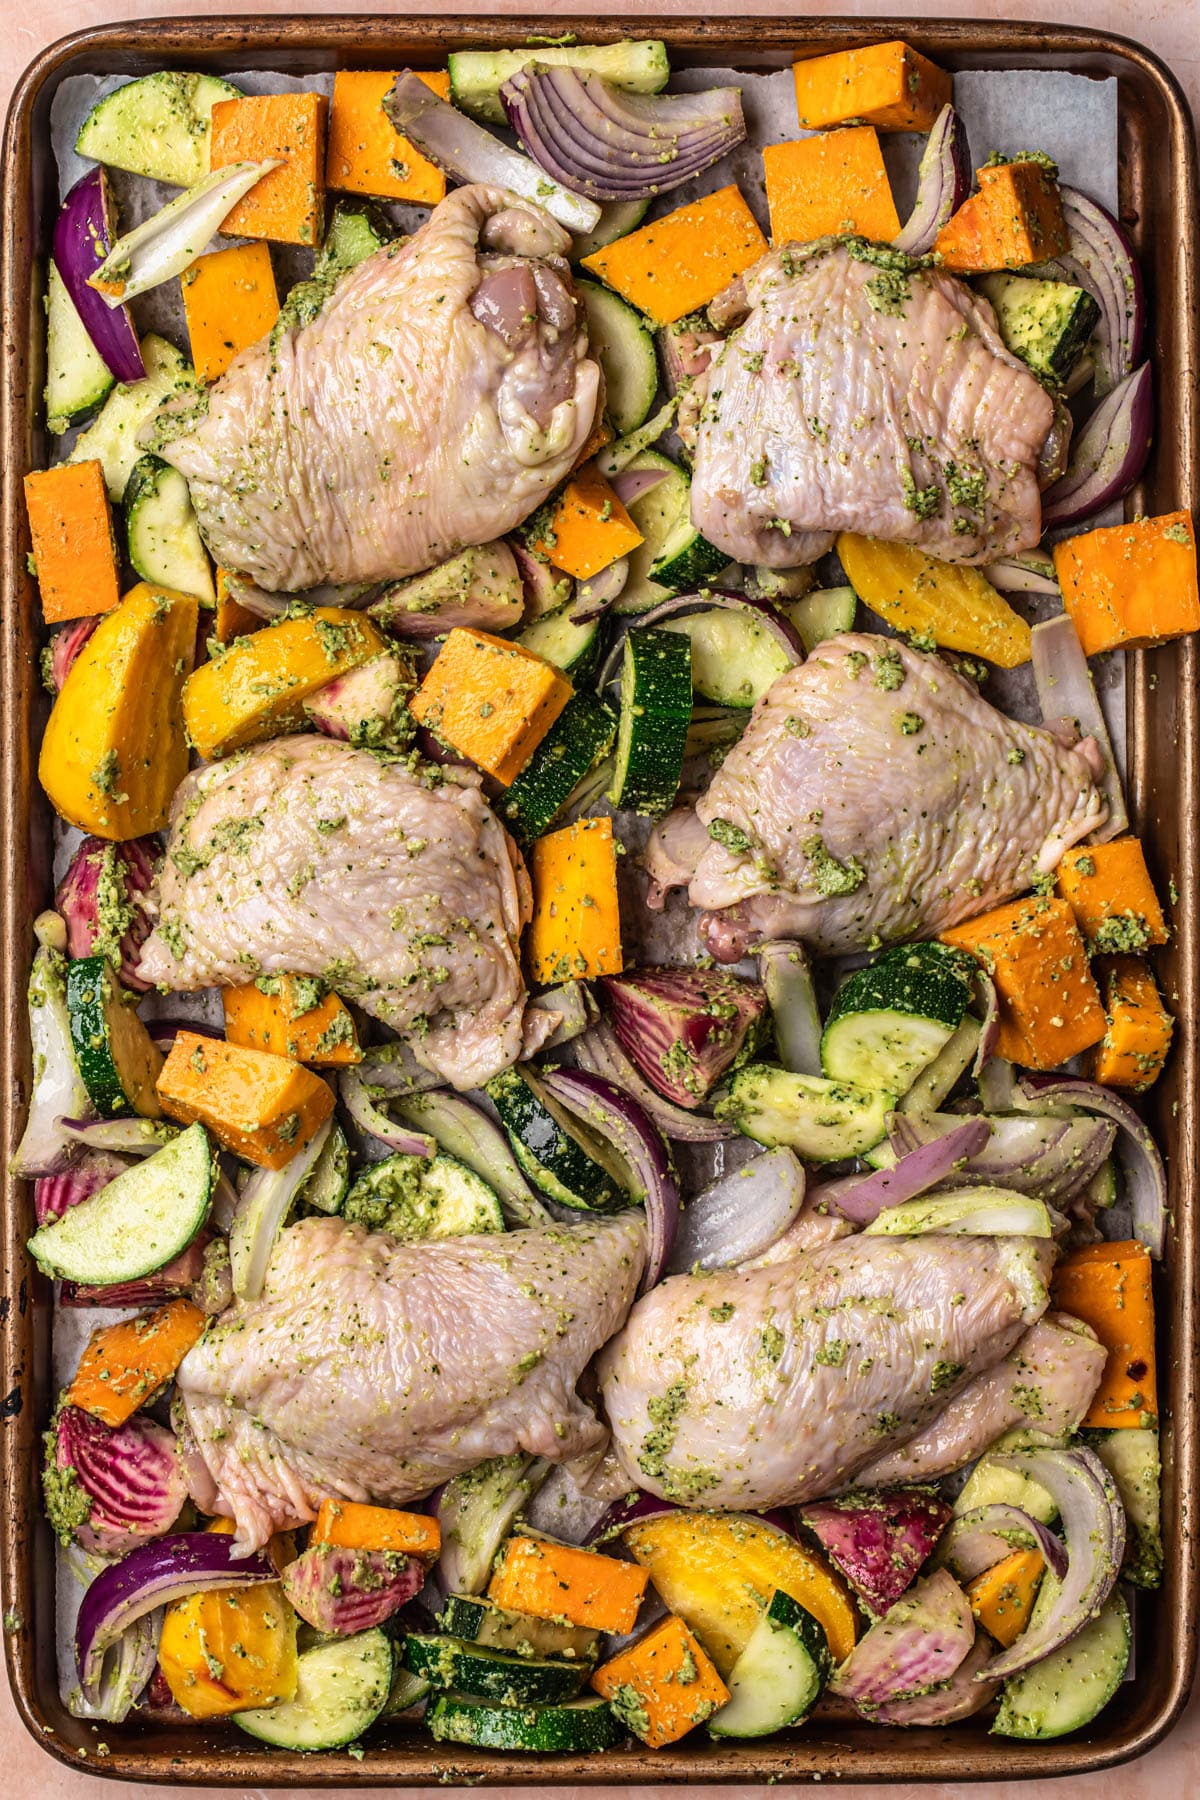 Pesto marinated chicken and vegetables added to a large sheet pan.